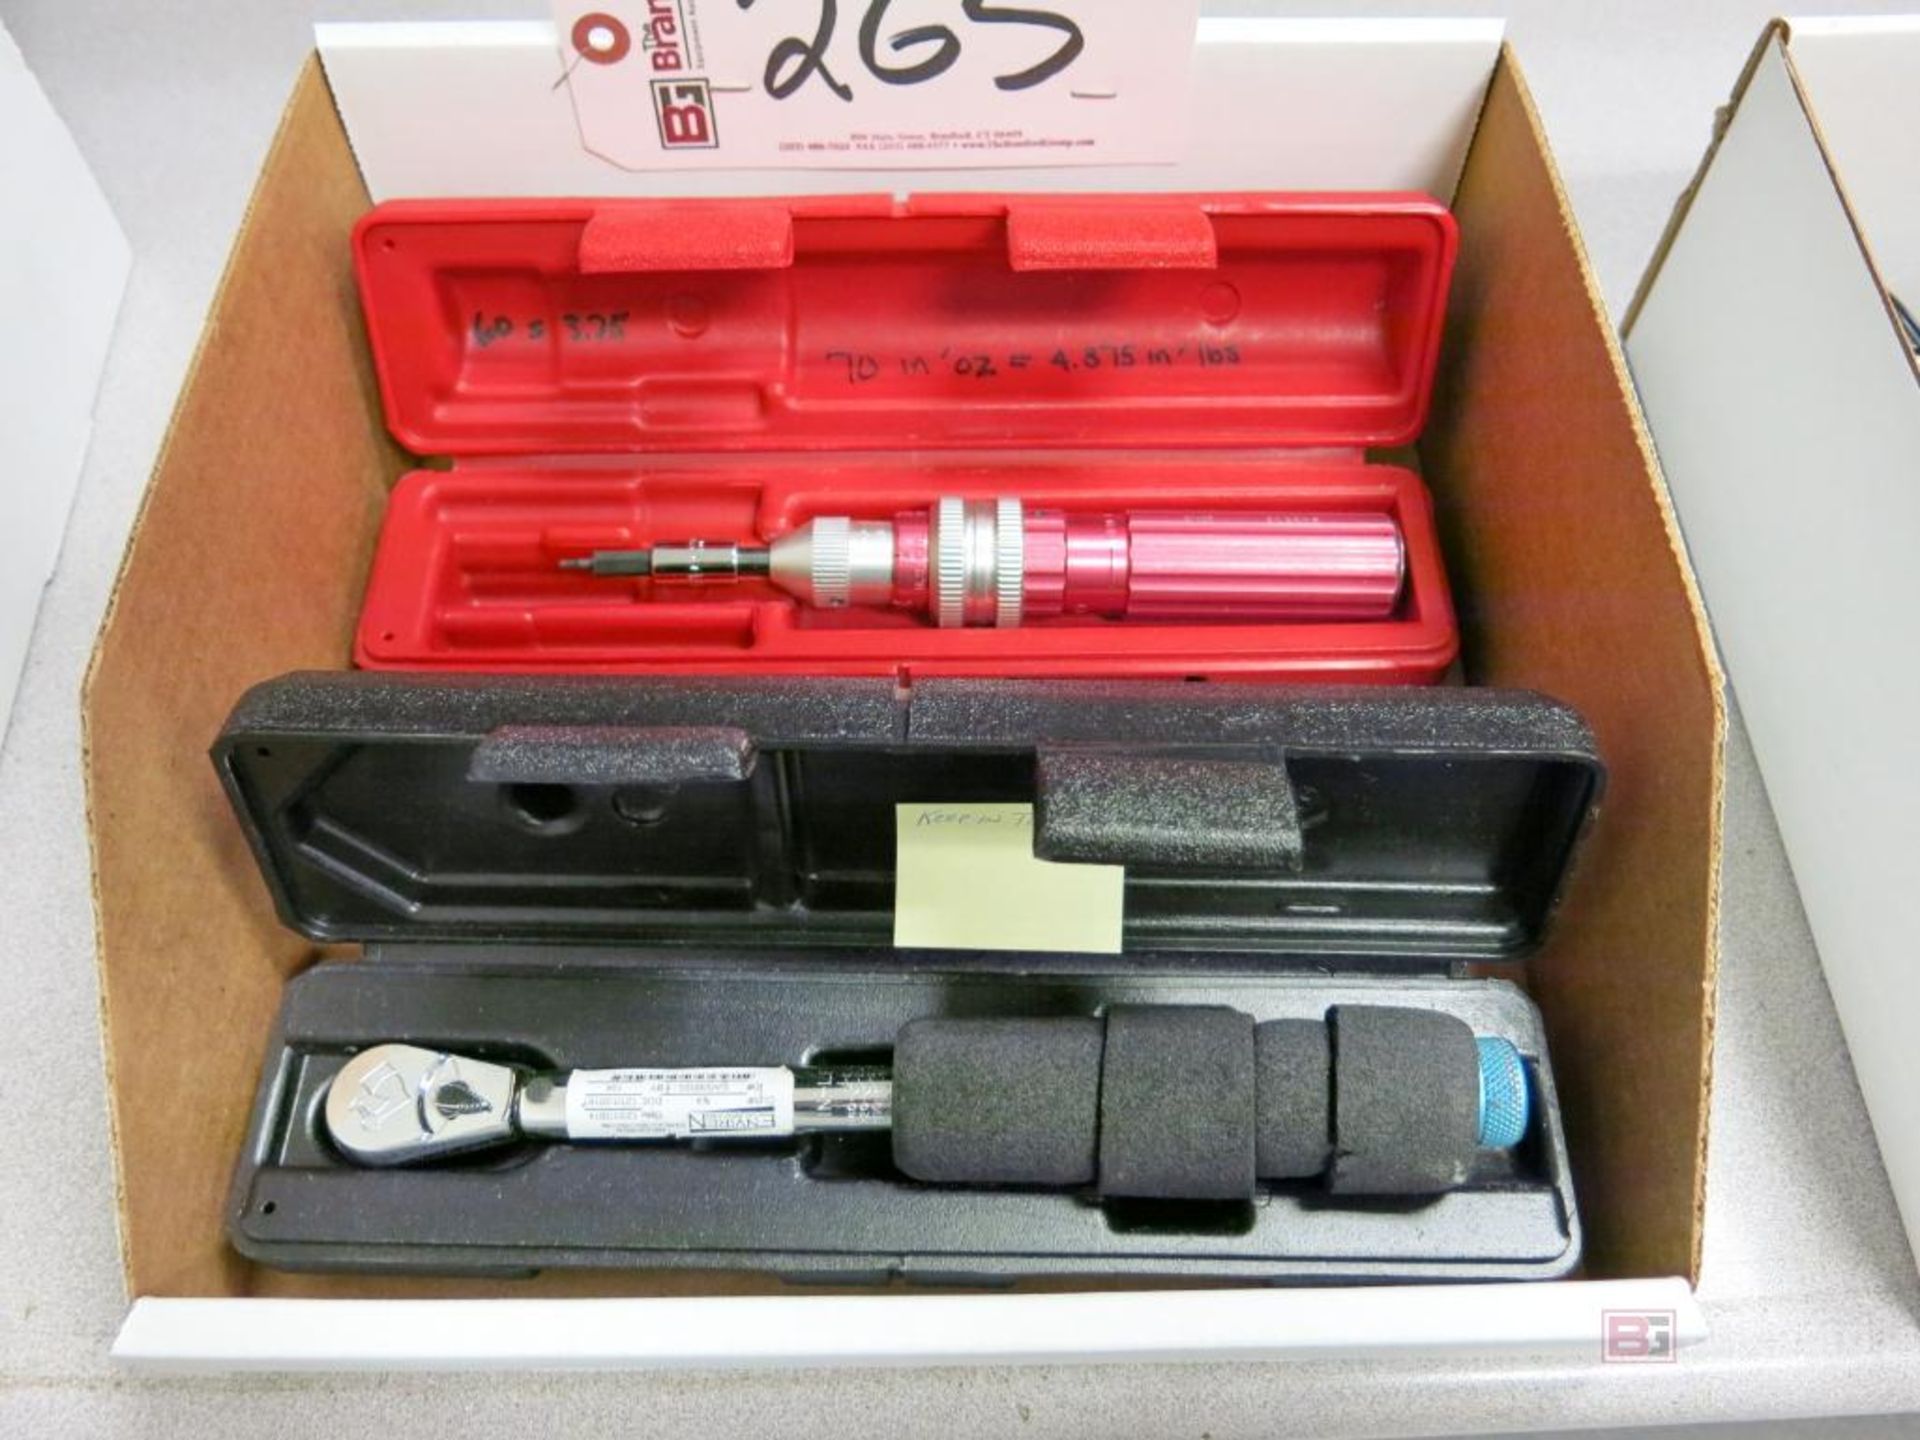 Armstrong Torque Wrench, Proto Model 6106 Torque Screwdriver